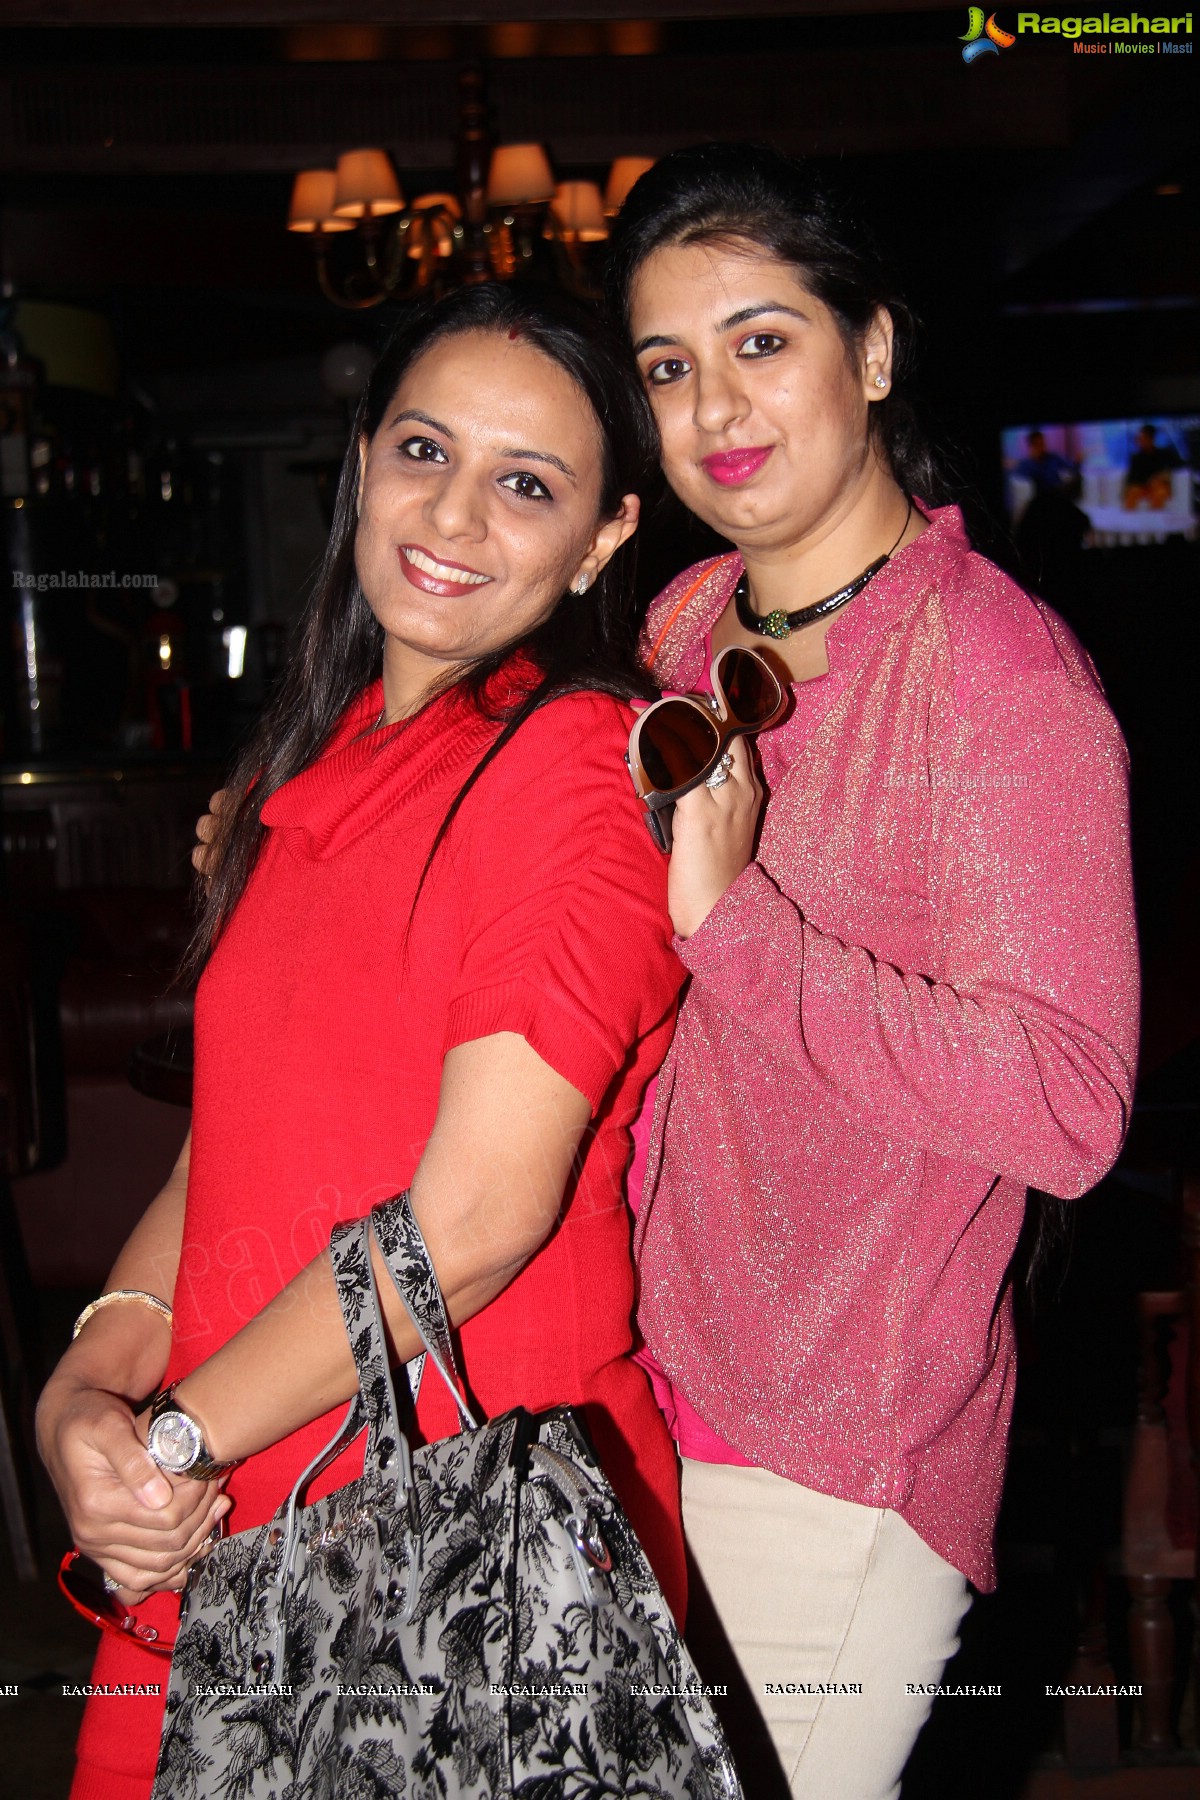 2nd Round of Gorgeous Girls Valentine Theme Party at 10D, Hyderabad